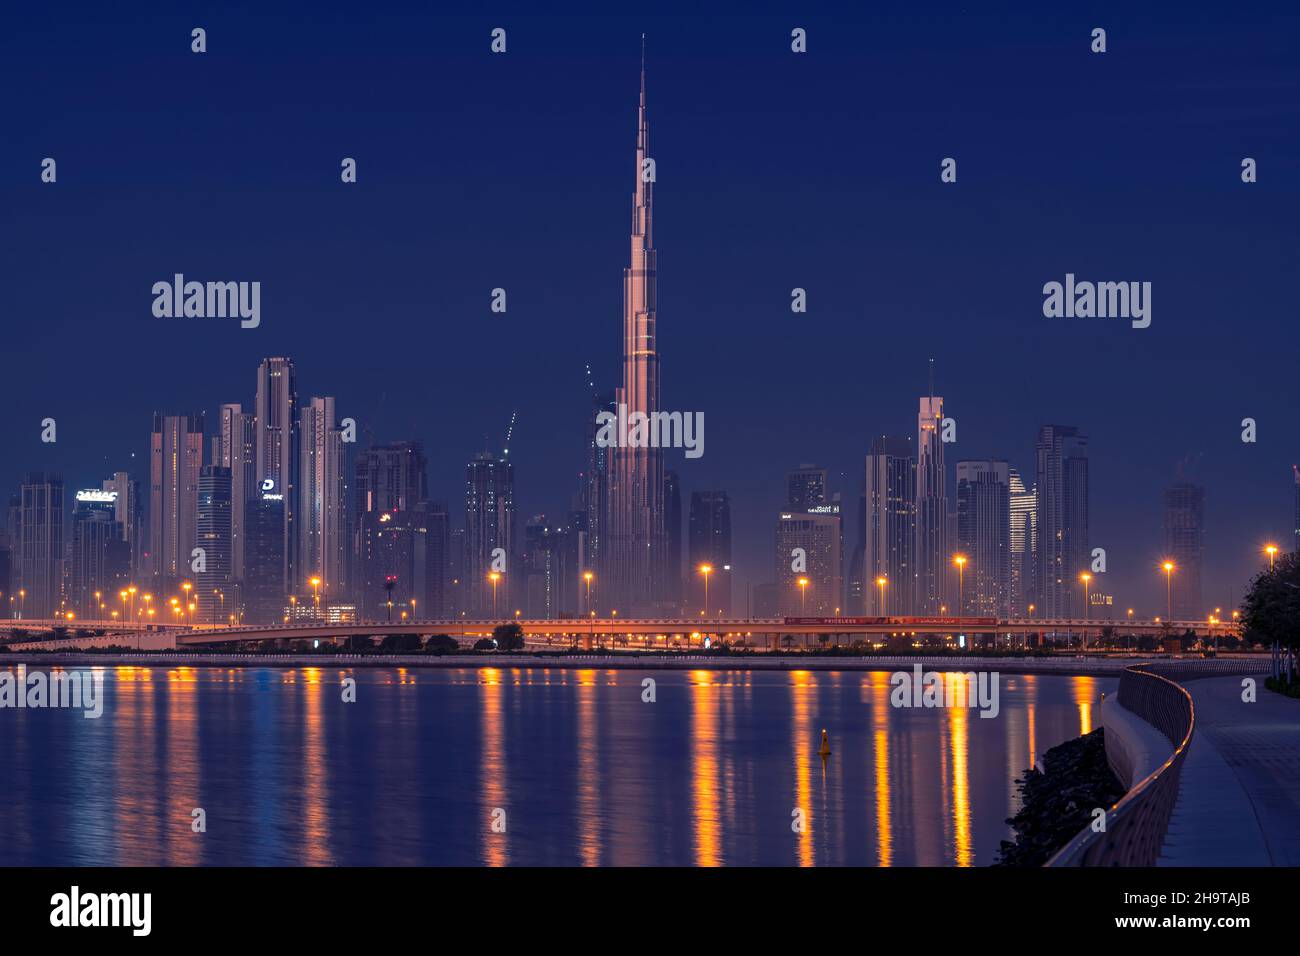 Panoramic view of the Dubai skyline with Burj khalifa and other sky scrapers from Al Jadaf Waterfront Dubai Stock Photo